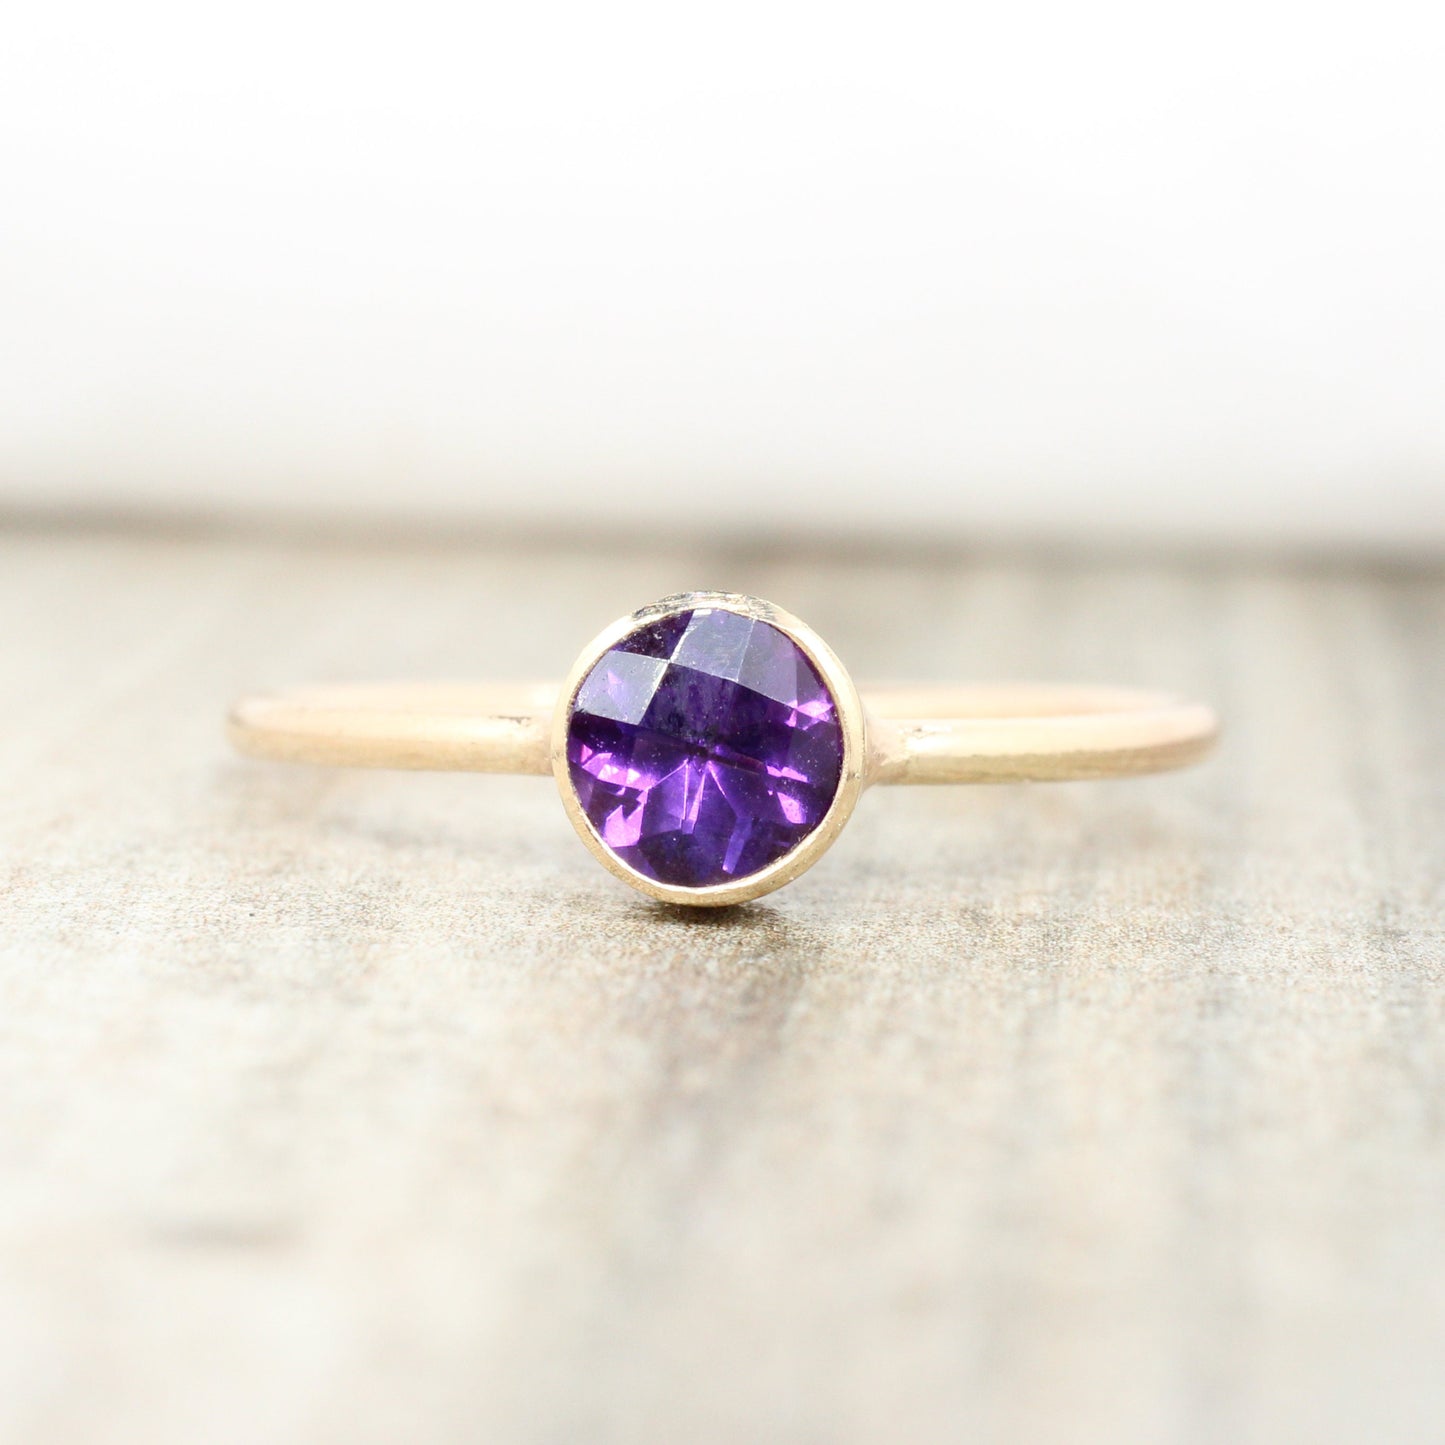 14K Gold Filled Genuine Amethyst Ring // 5mm Faceted February Birthstone